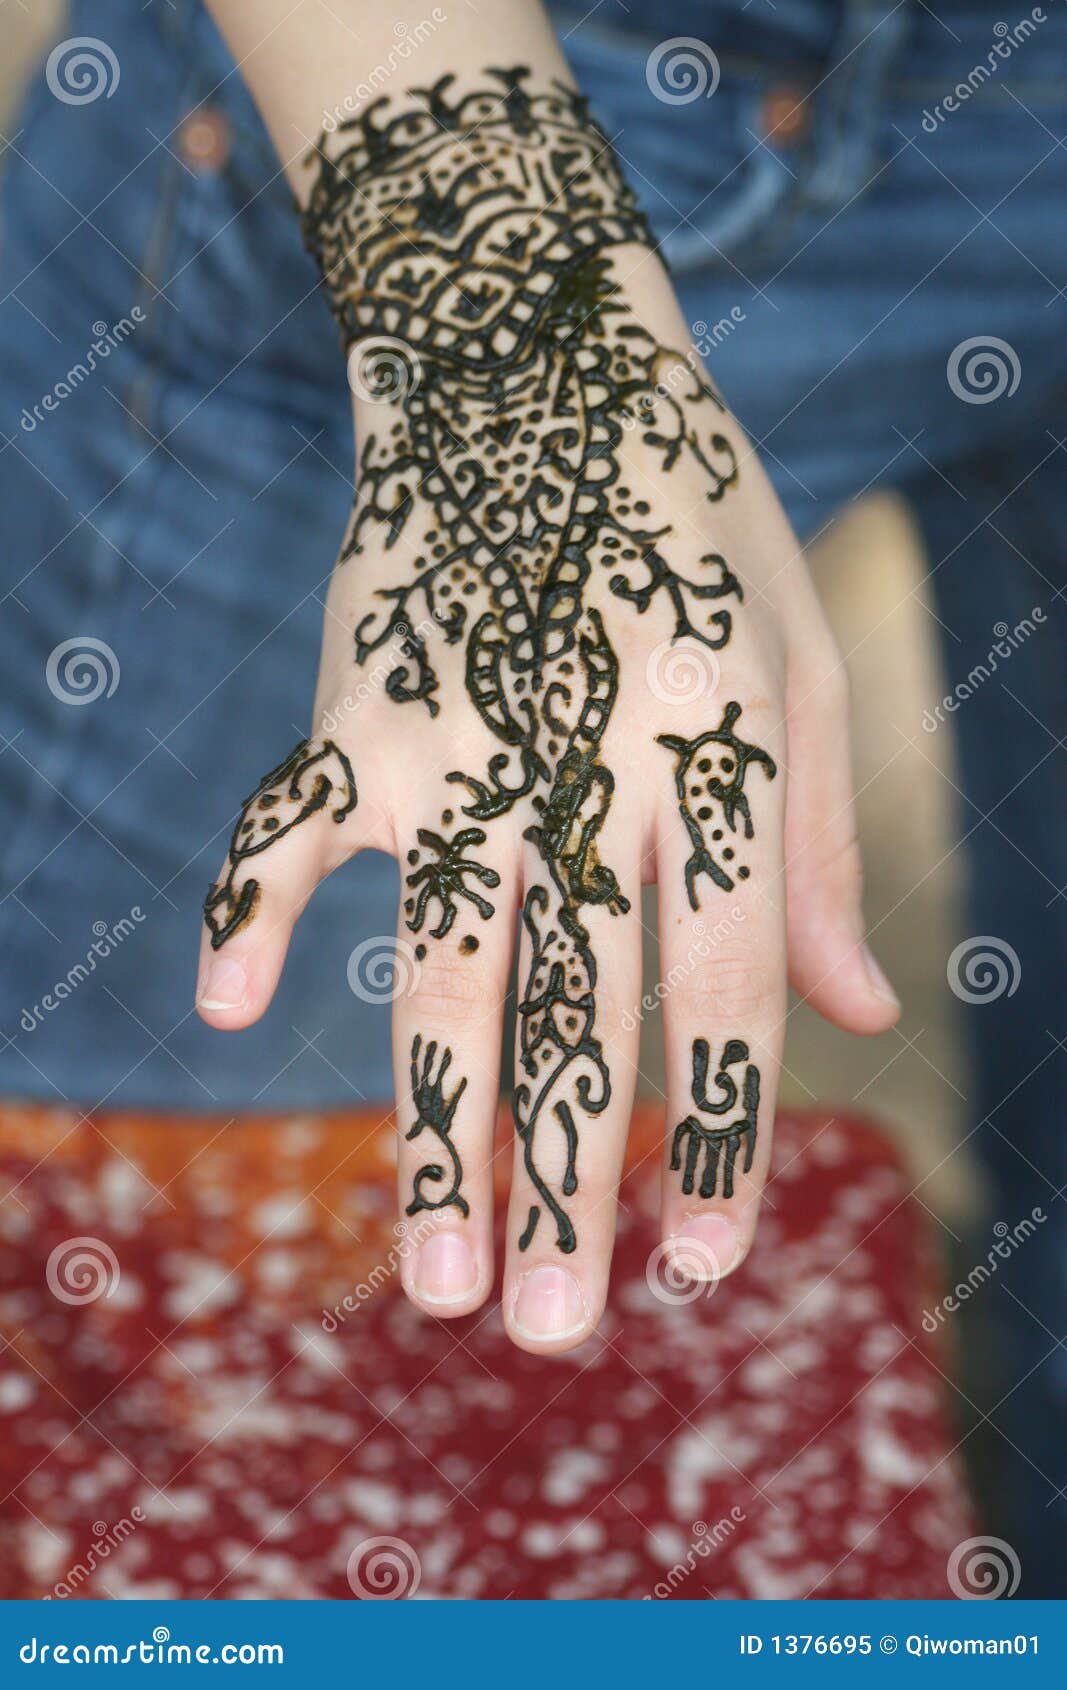 Families In Bali Warned About Dangers Of Black Henna Tattoos As Another  Child Is Left Scarred  The Bali Sun